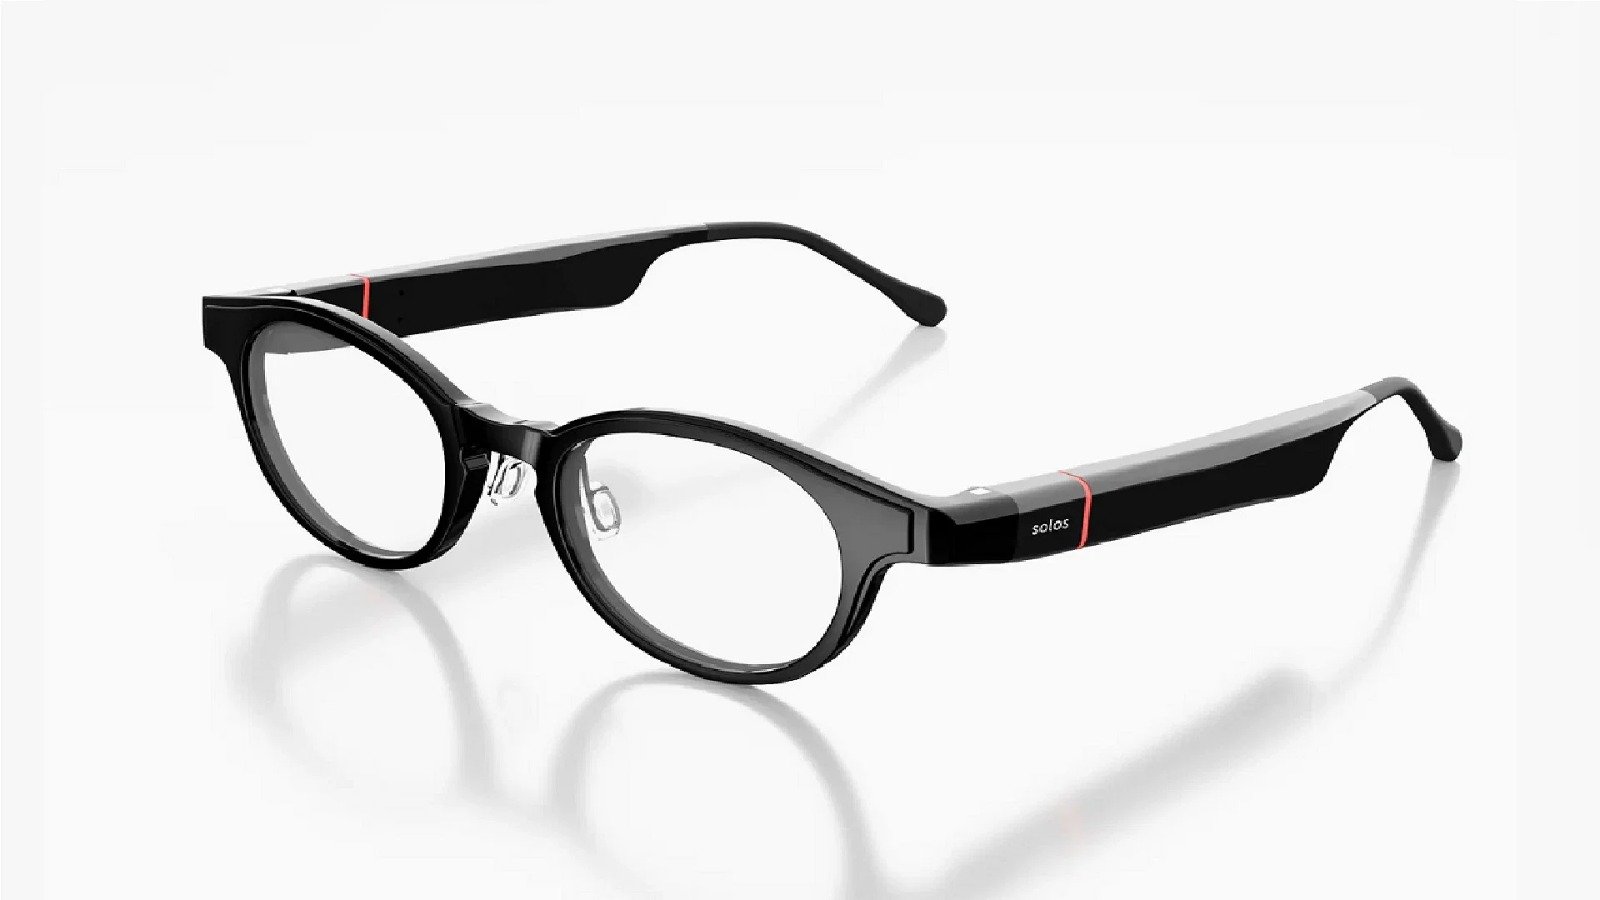 World's first smart glass: World's first smart glass with GPT-4o launched, will also support Gemini